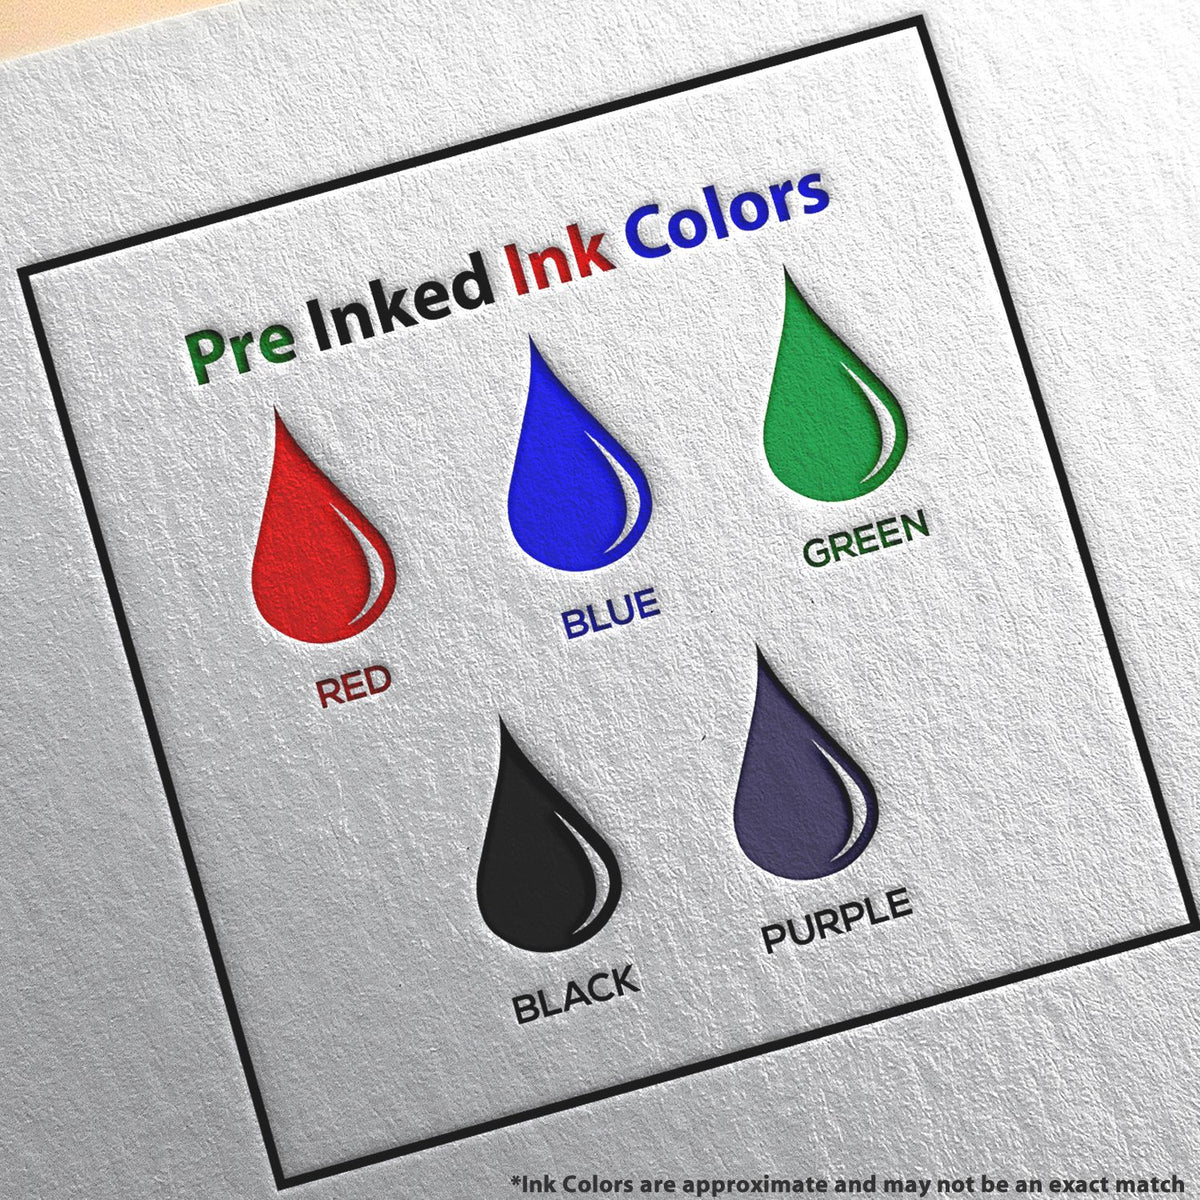 A picture showing the different ink colors or hues available for the Slim Pre-Inked Kentucky Architect Seal Stamp product.